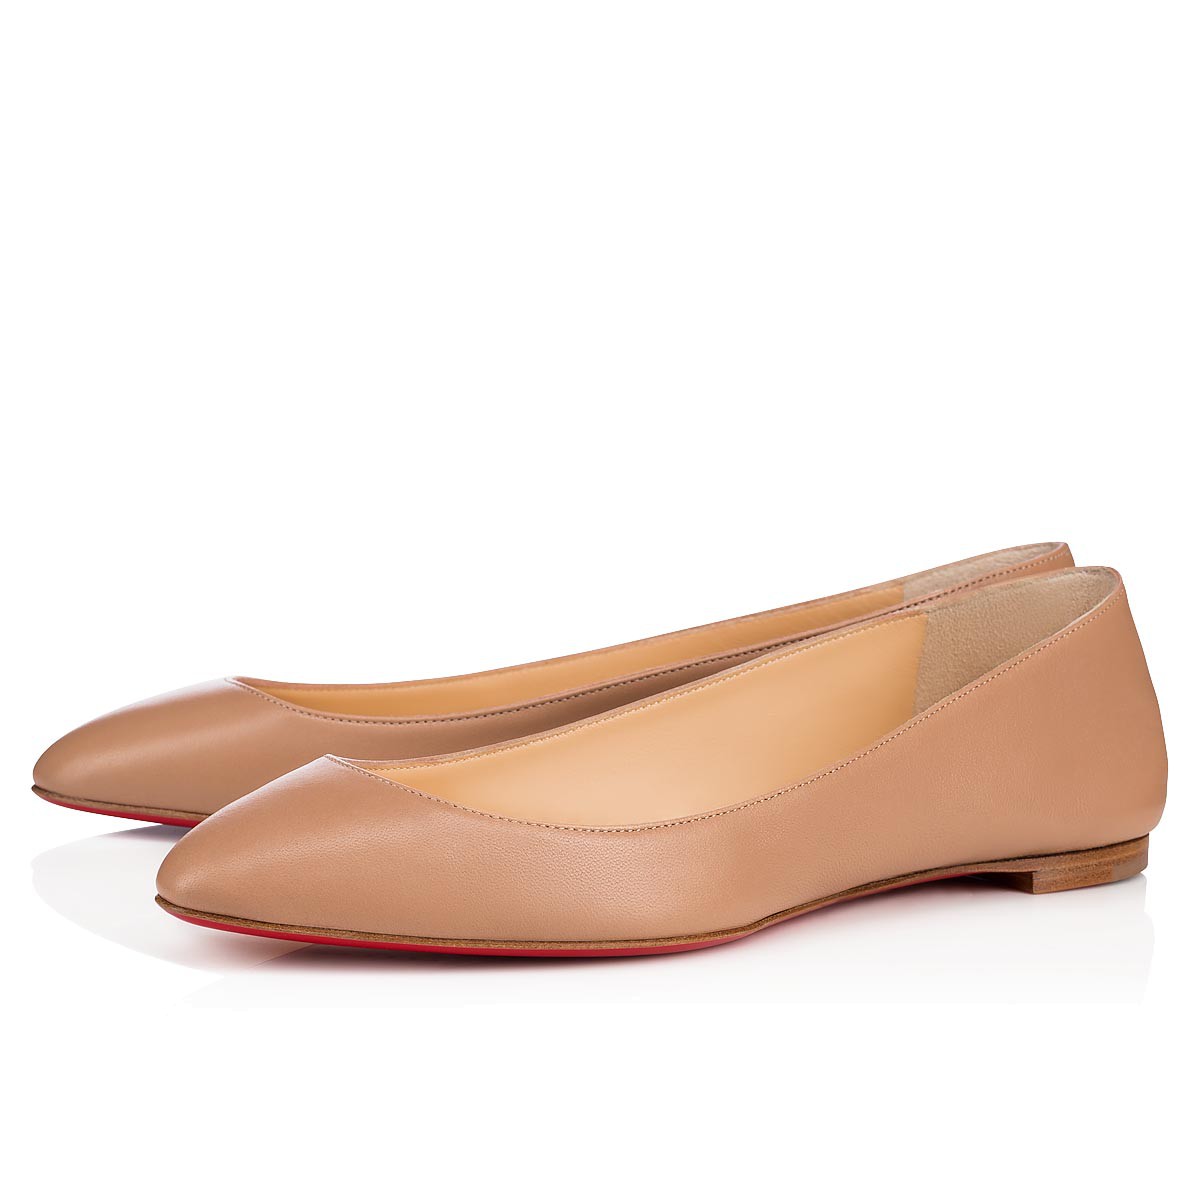 Christian Louboutin Eloise Flats in Nude — No More